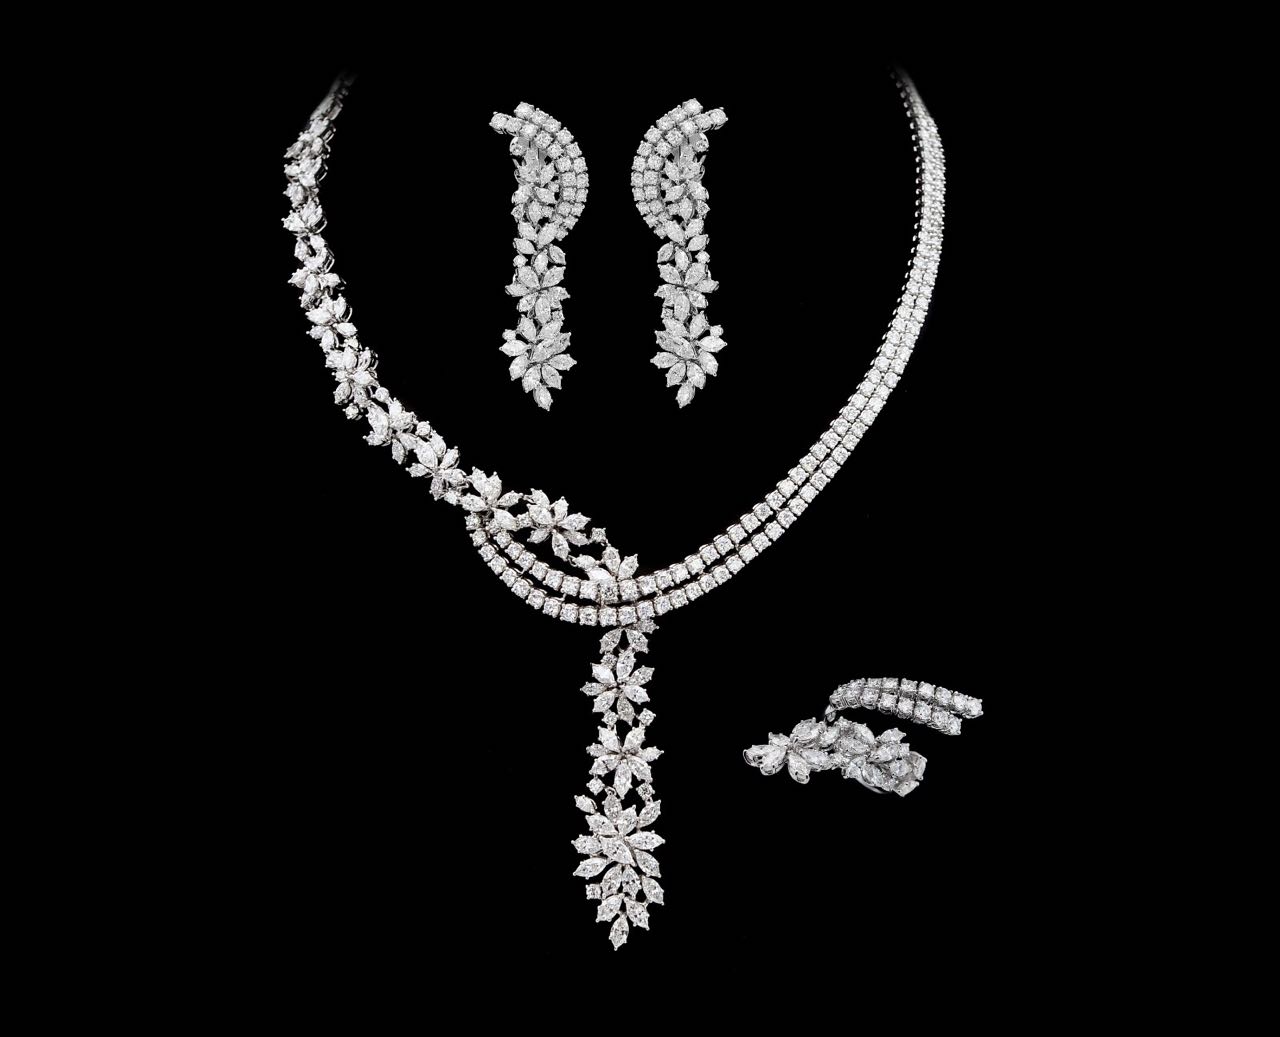 Diamond earring, necklace and ring set